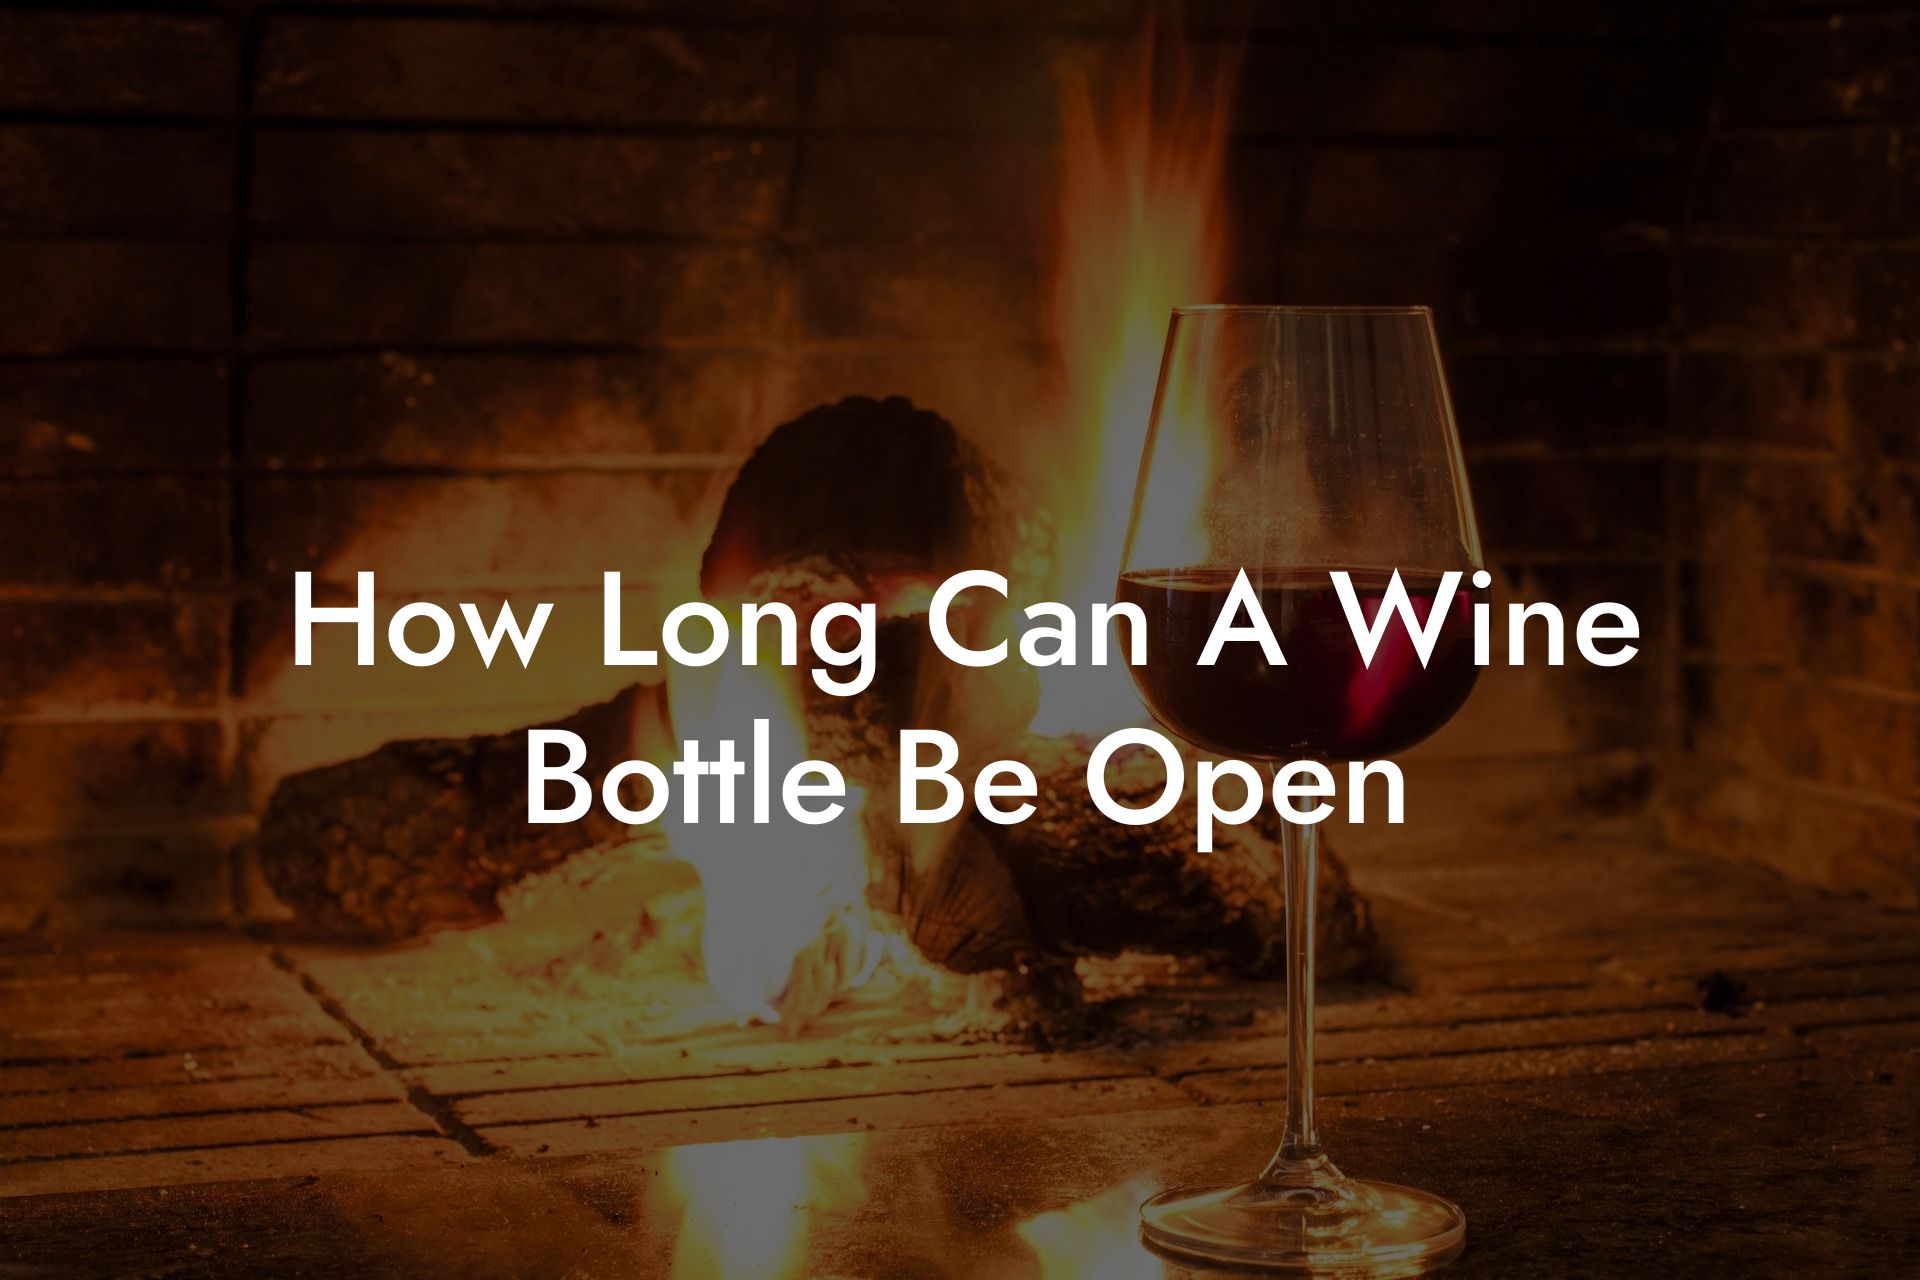 How Long Can A Wine Bottle Be Open